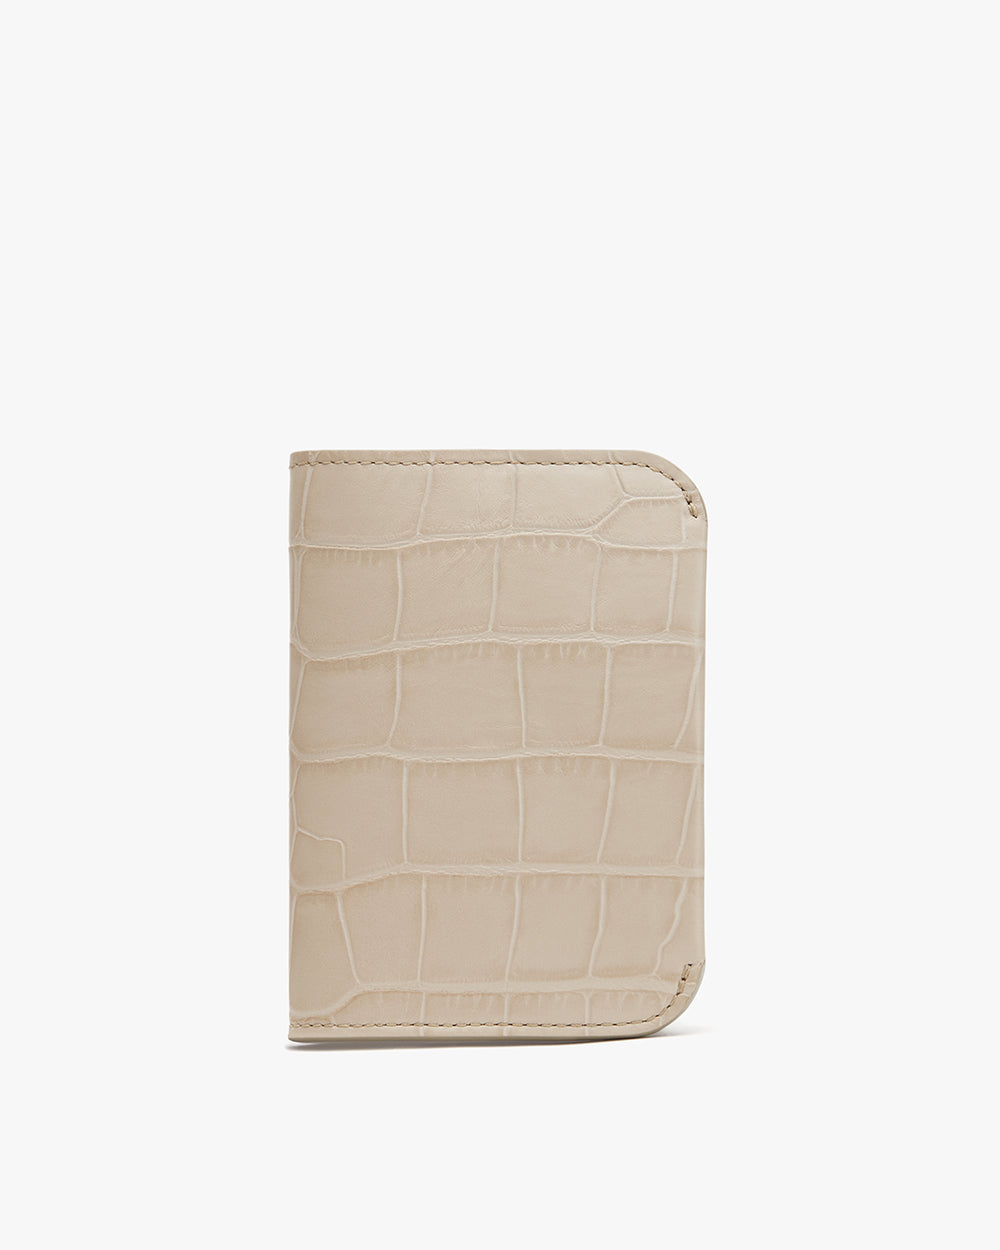 Wallet with textured exterior design on plain background.